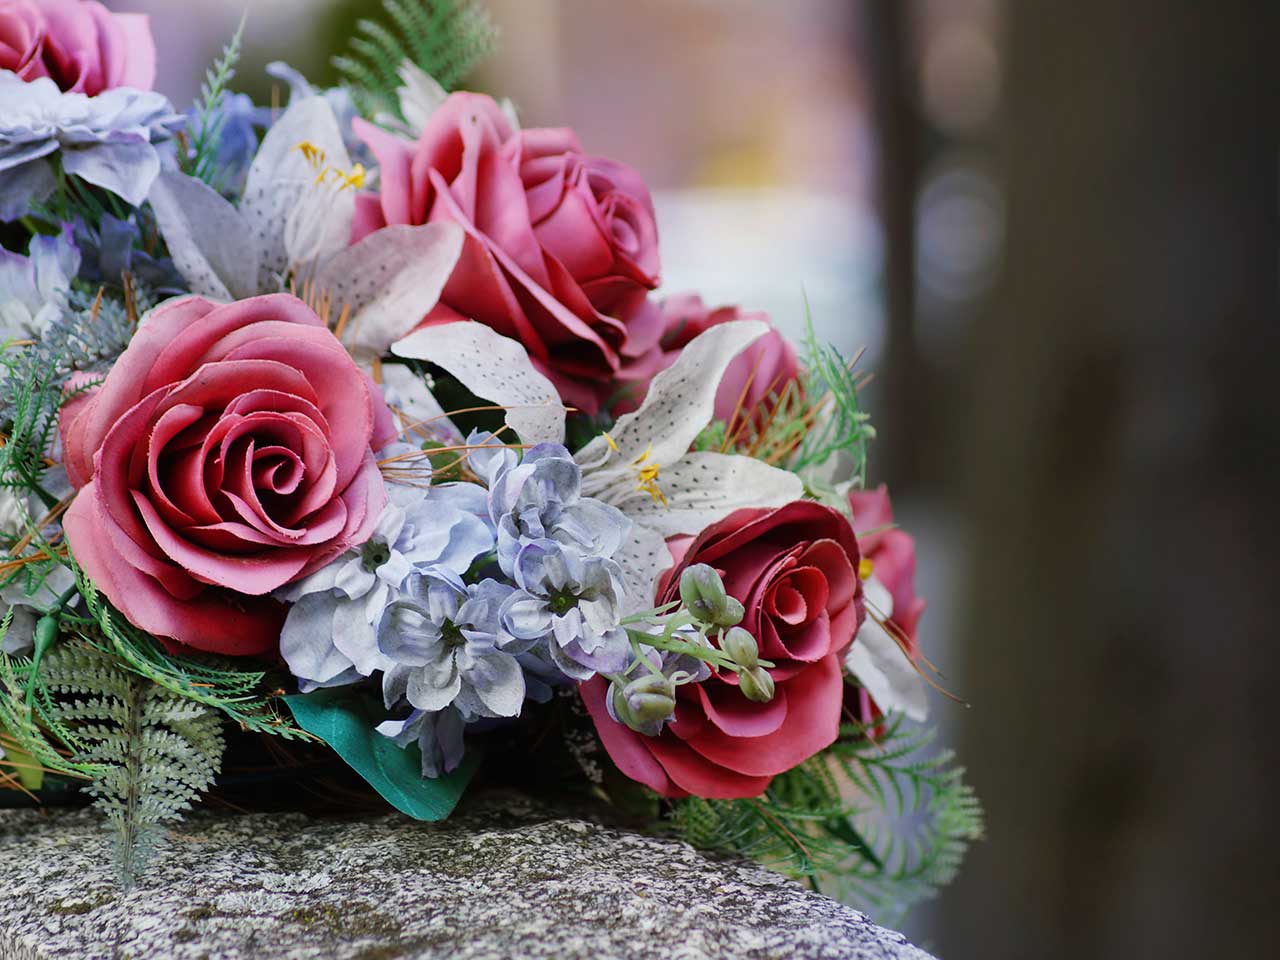 Funeral flowers resting on a gravestone